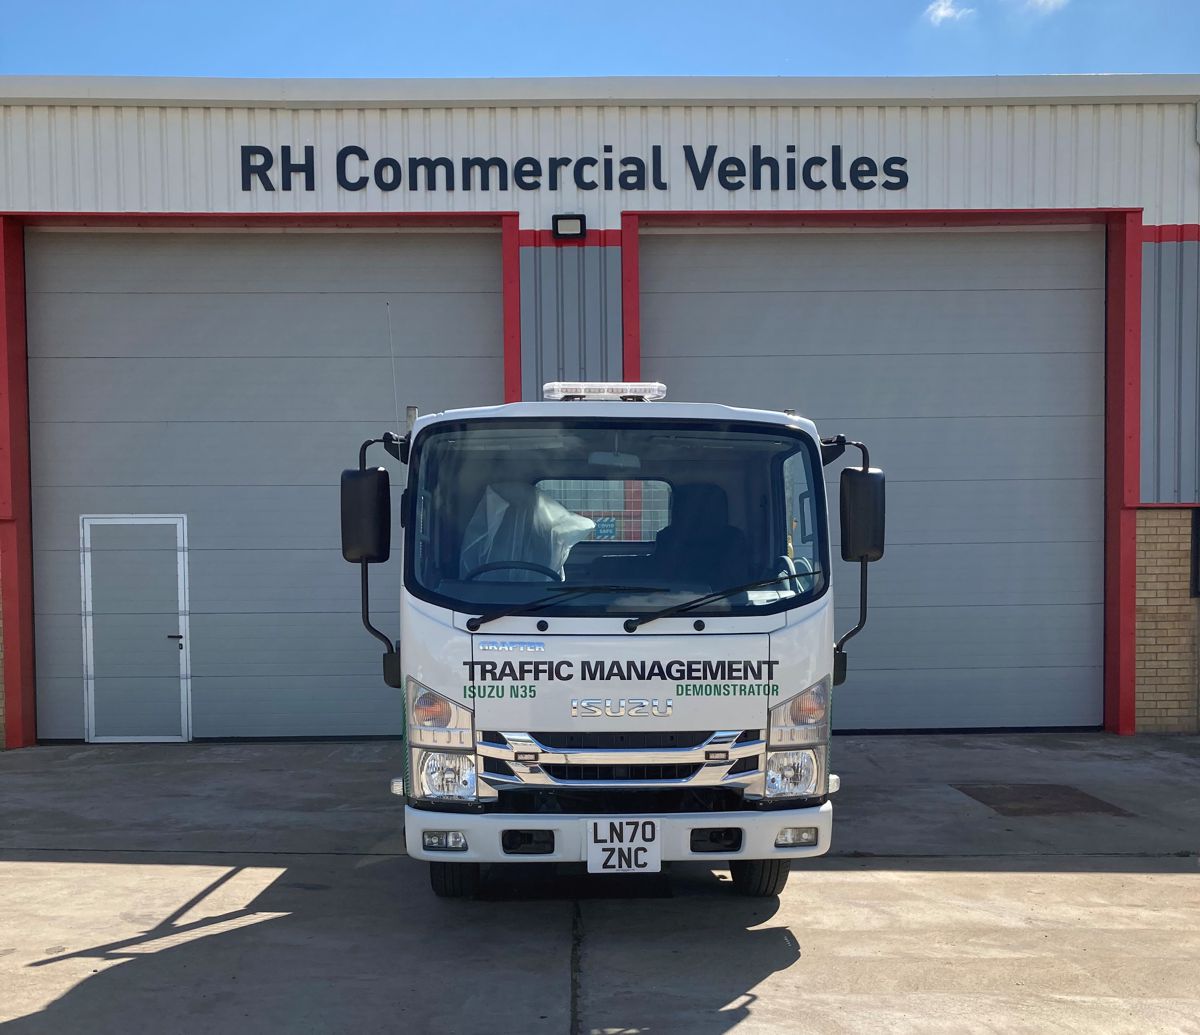 RH Commercial Vehicles opens 2nd Isuzu Truck dealership in England